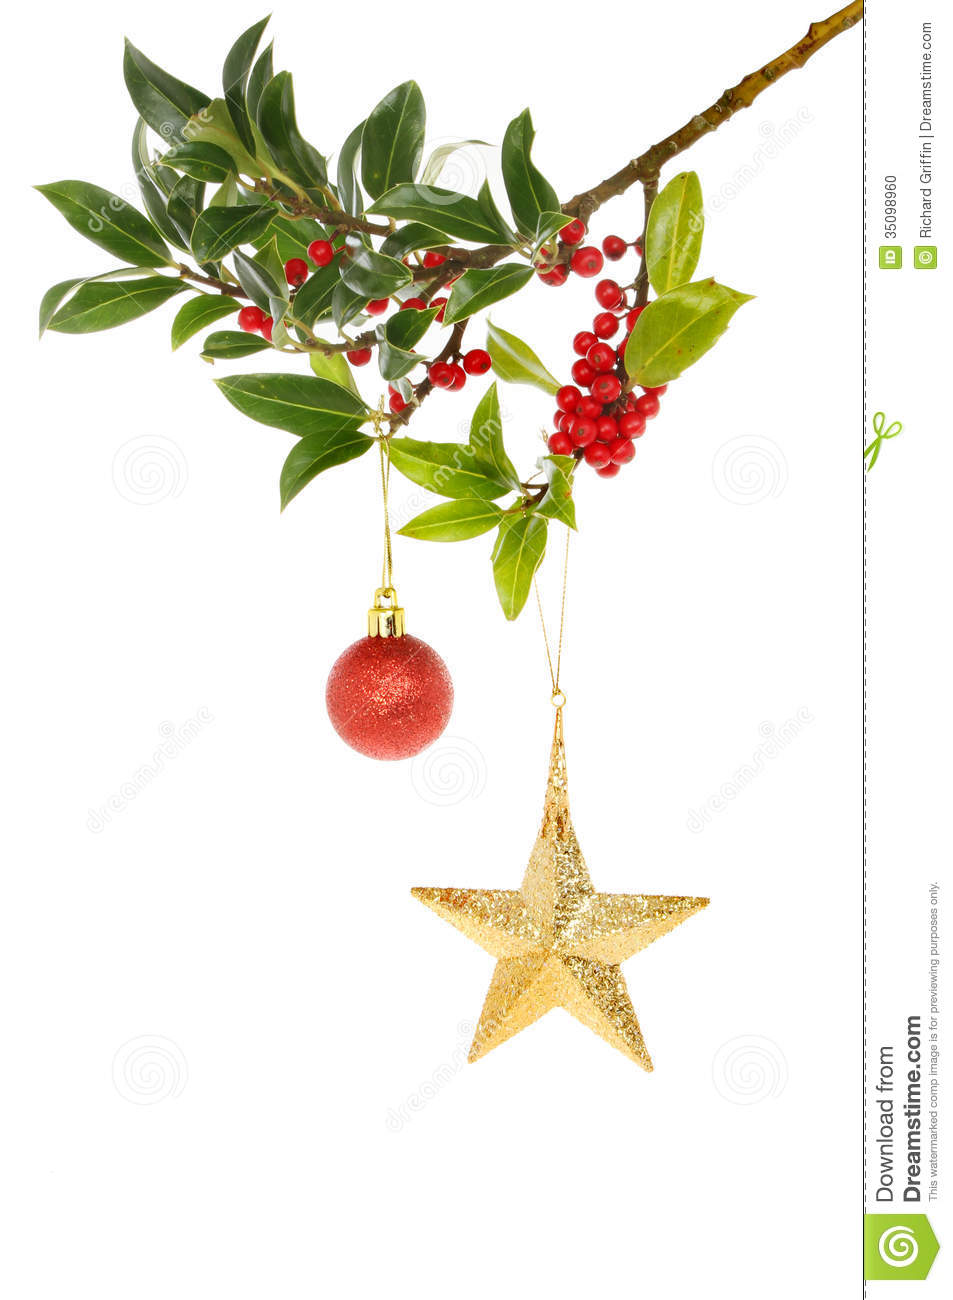 Berry Laden Holly Bough Decorated With A Christmas Star And Bauble